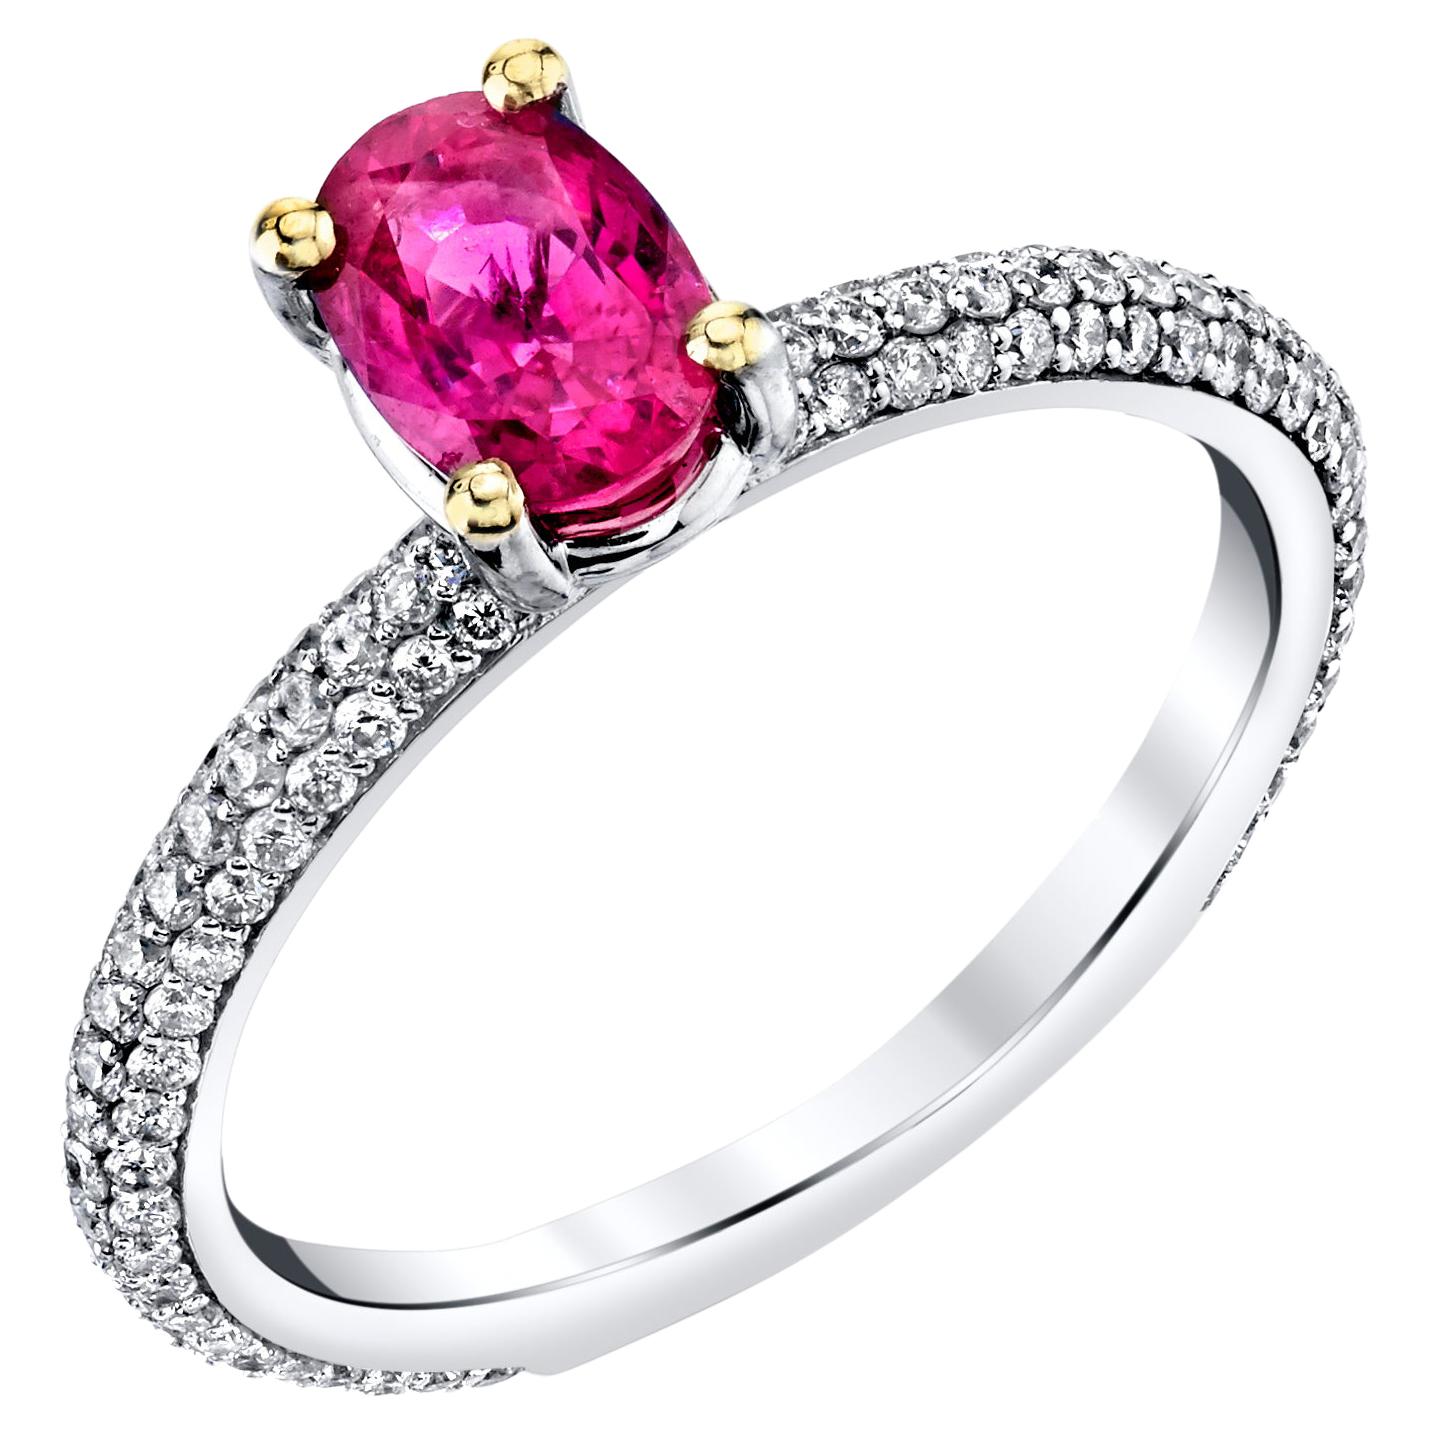 1.78 Carat Pink Sapphire and Diamond Baguette Engagement Ring in 18k ...